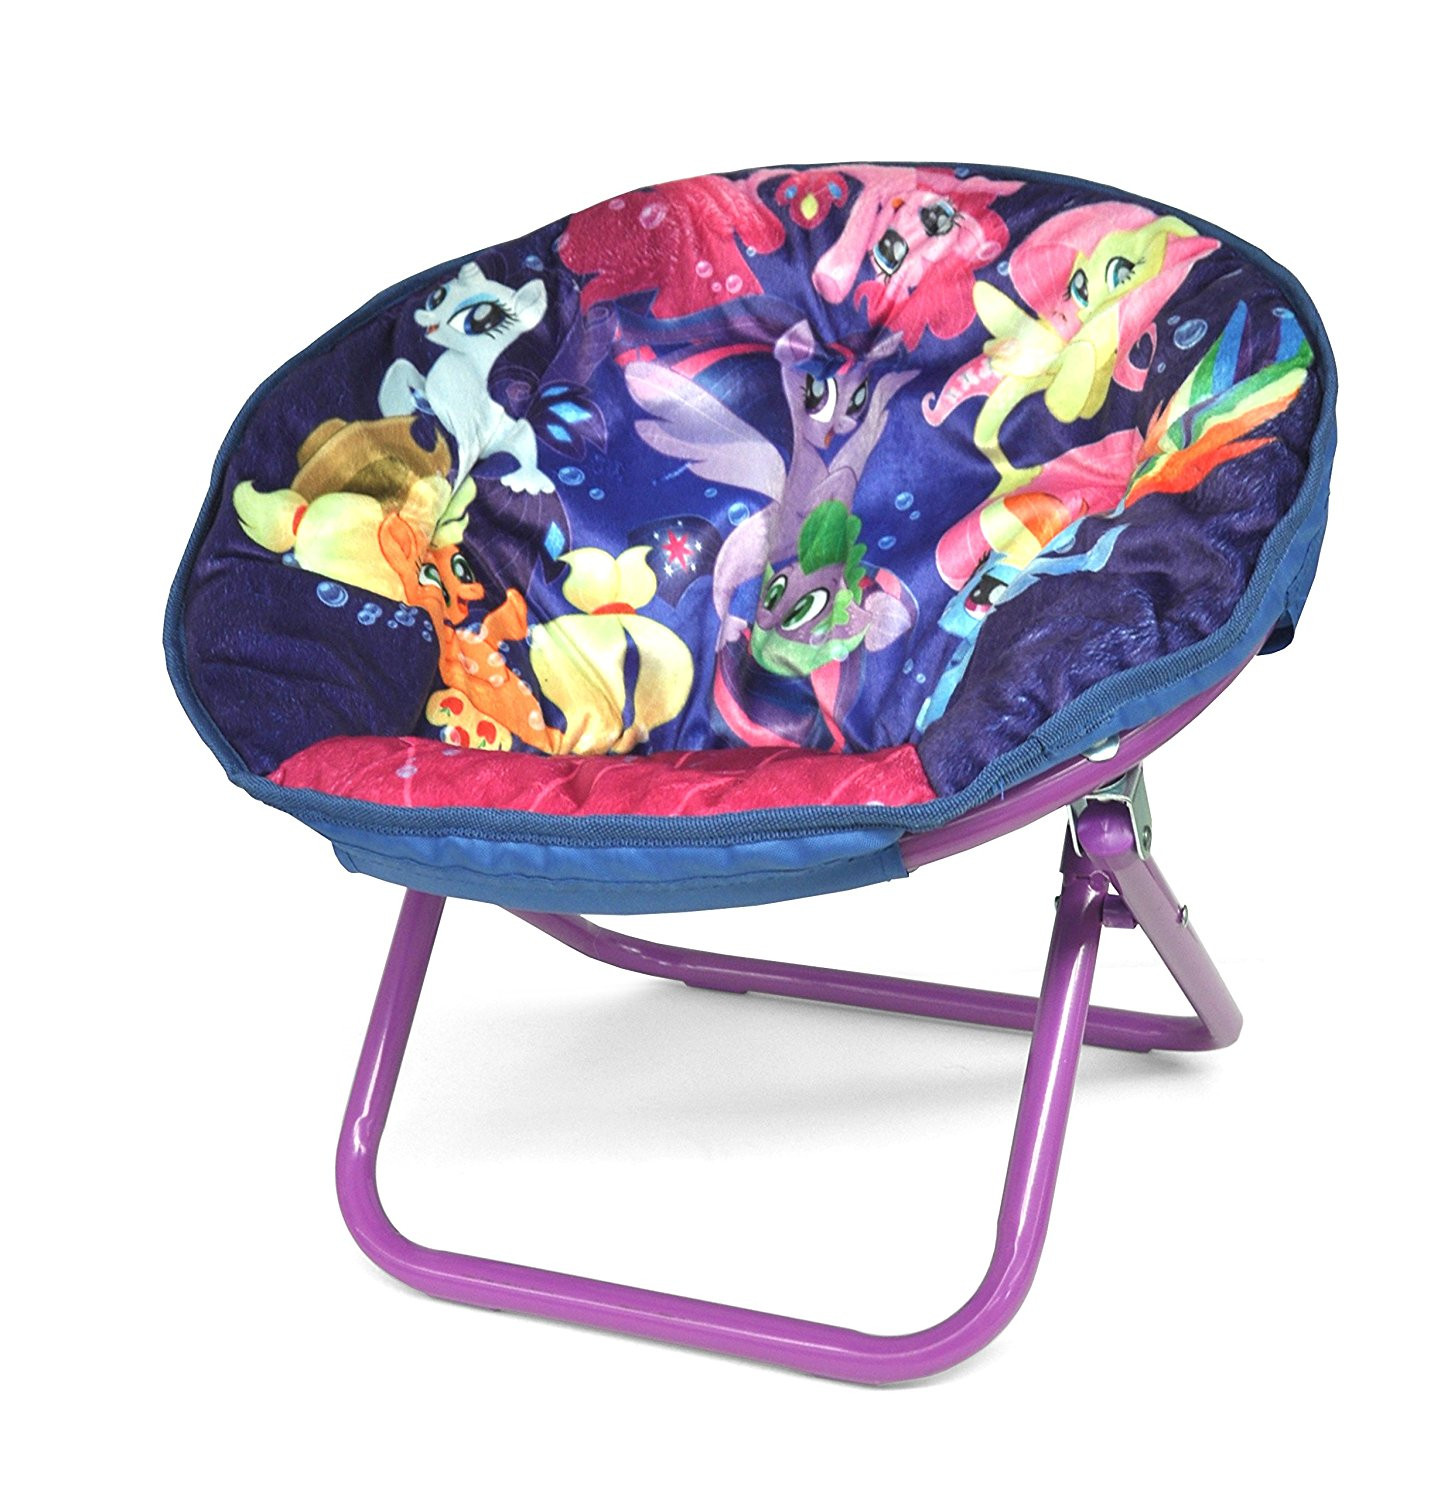 Kids Saucer Chair
 New "My Little Pony The Movie" Mini Saucer Chair